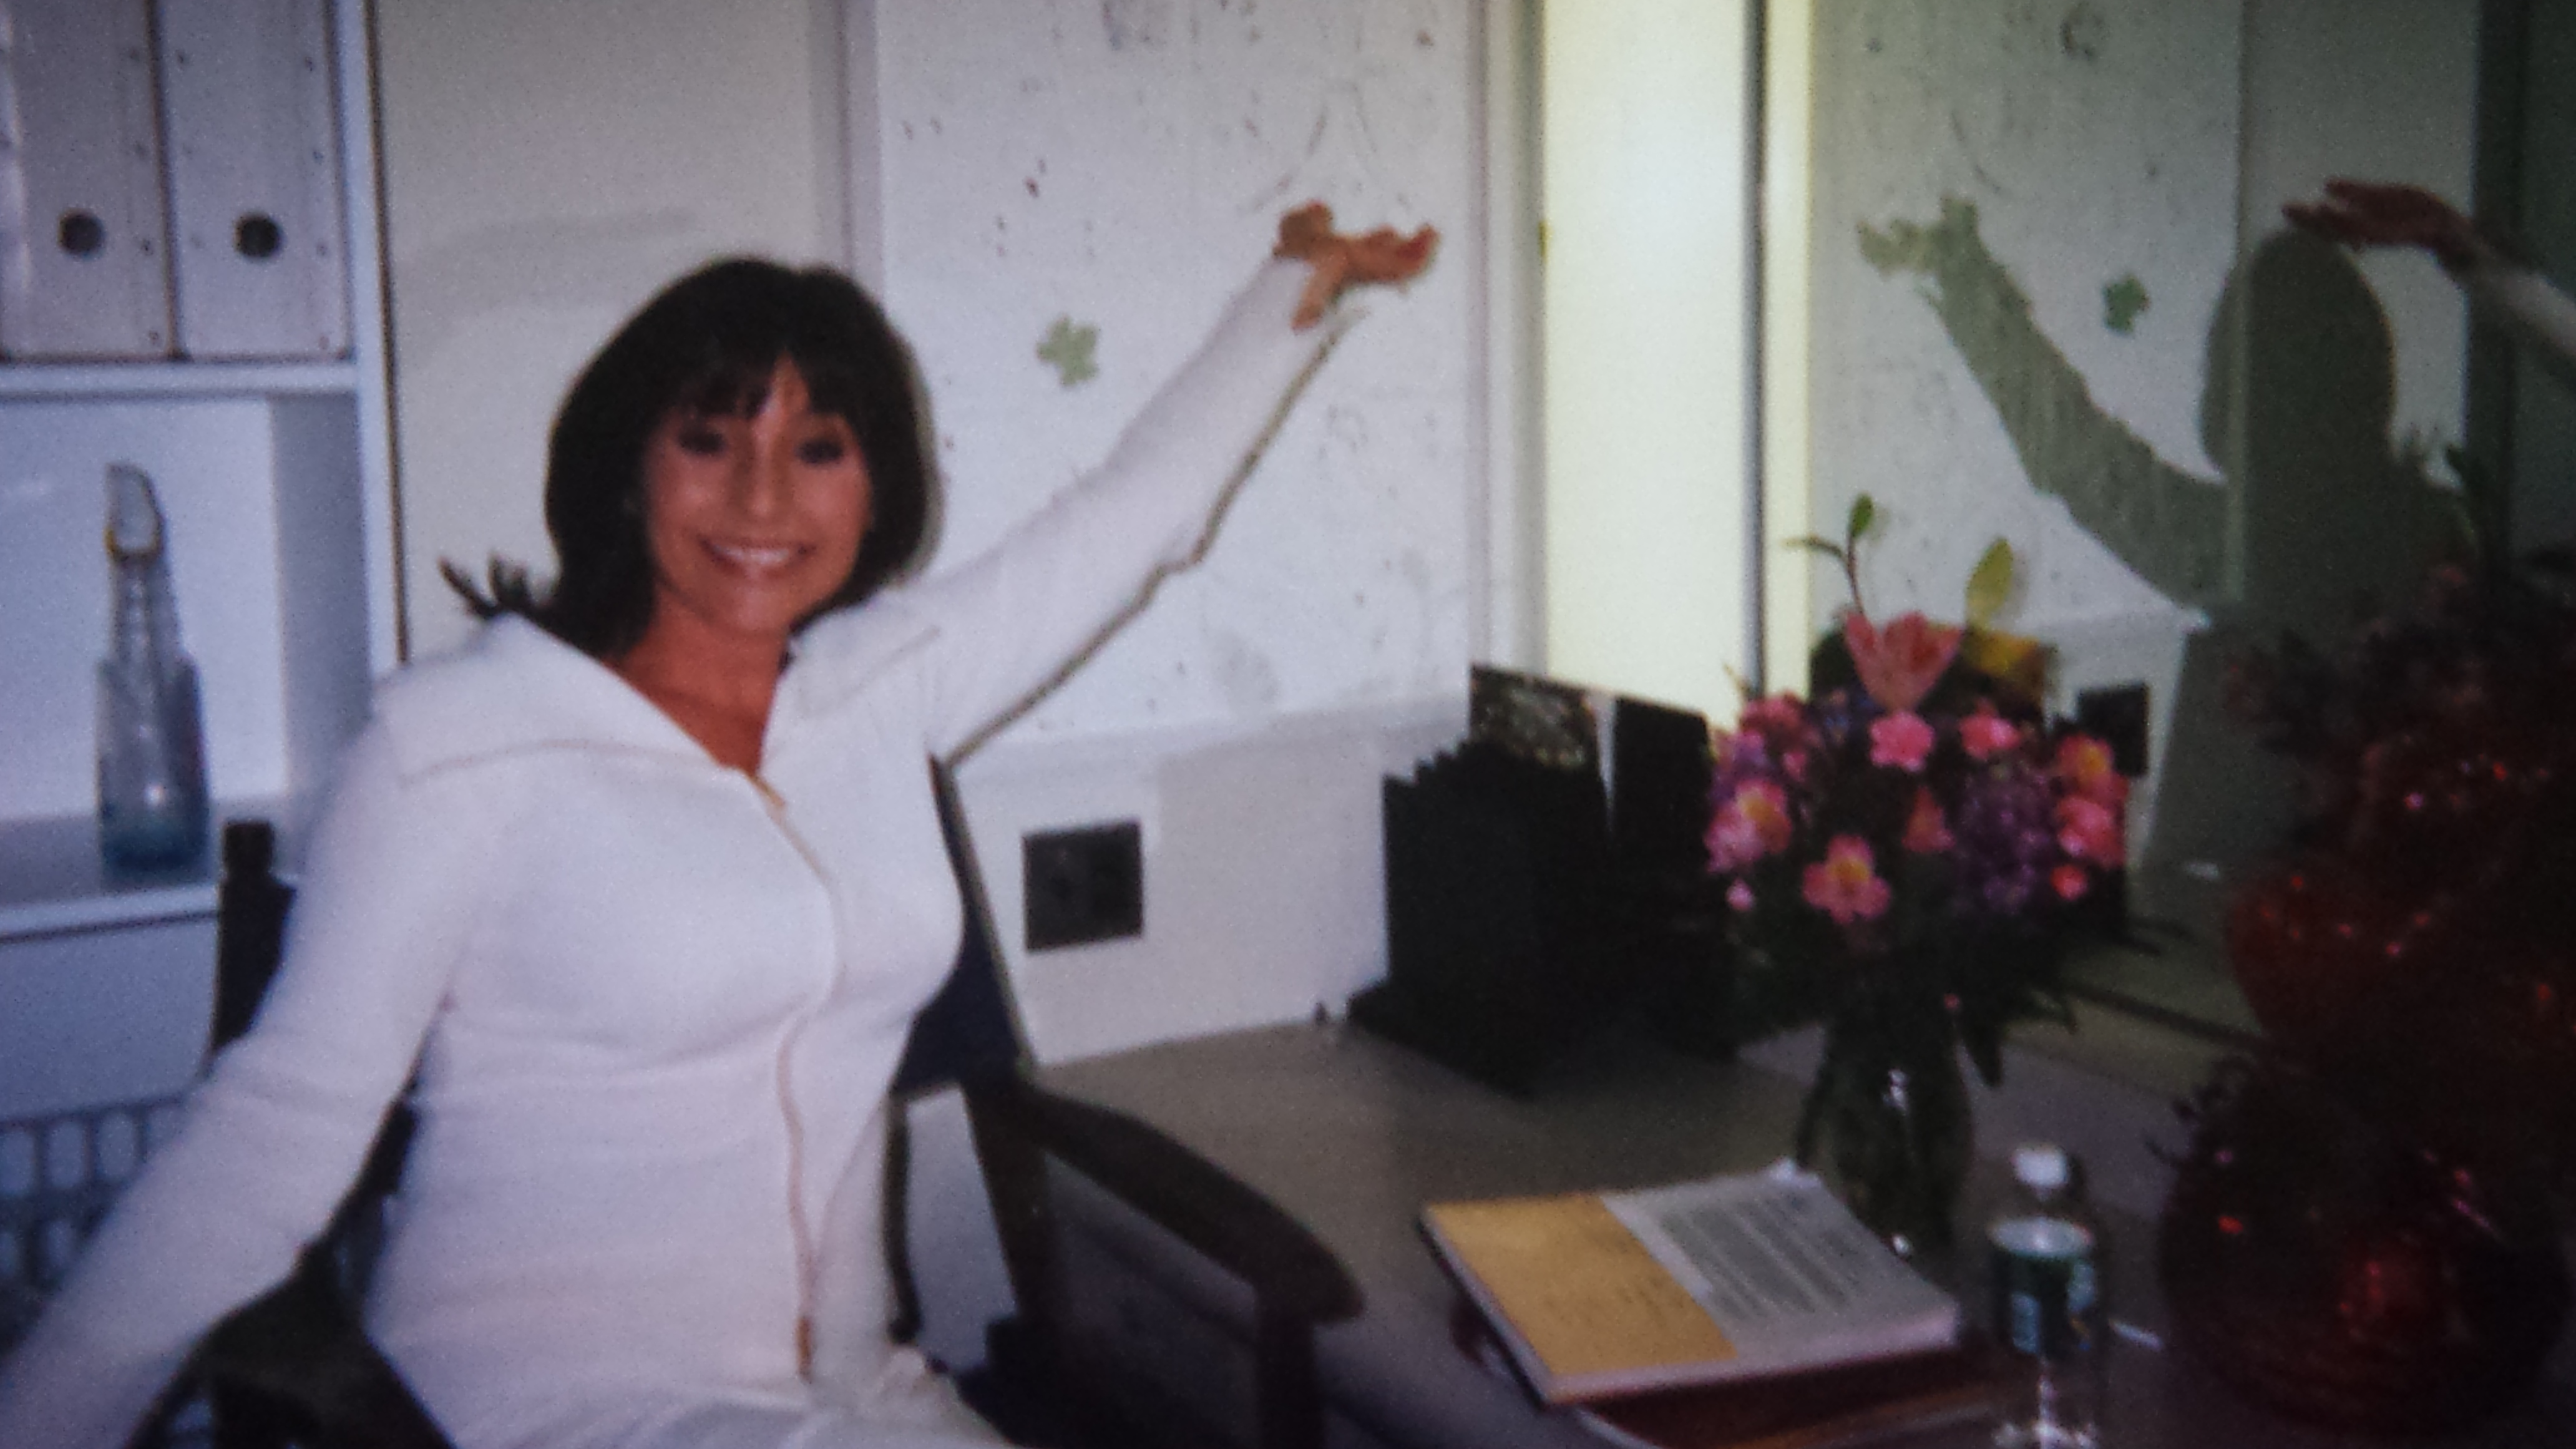 Heather (then Thompson) in her dressing room at ABC's The View (2003)